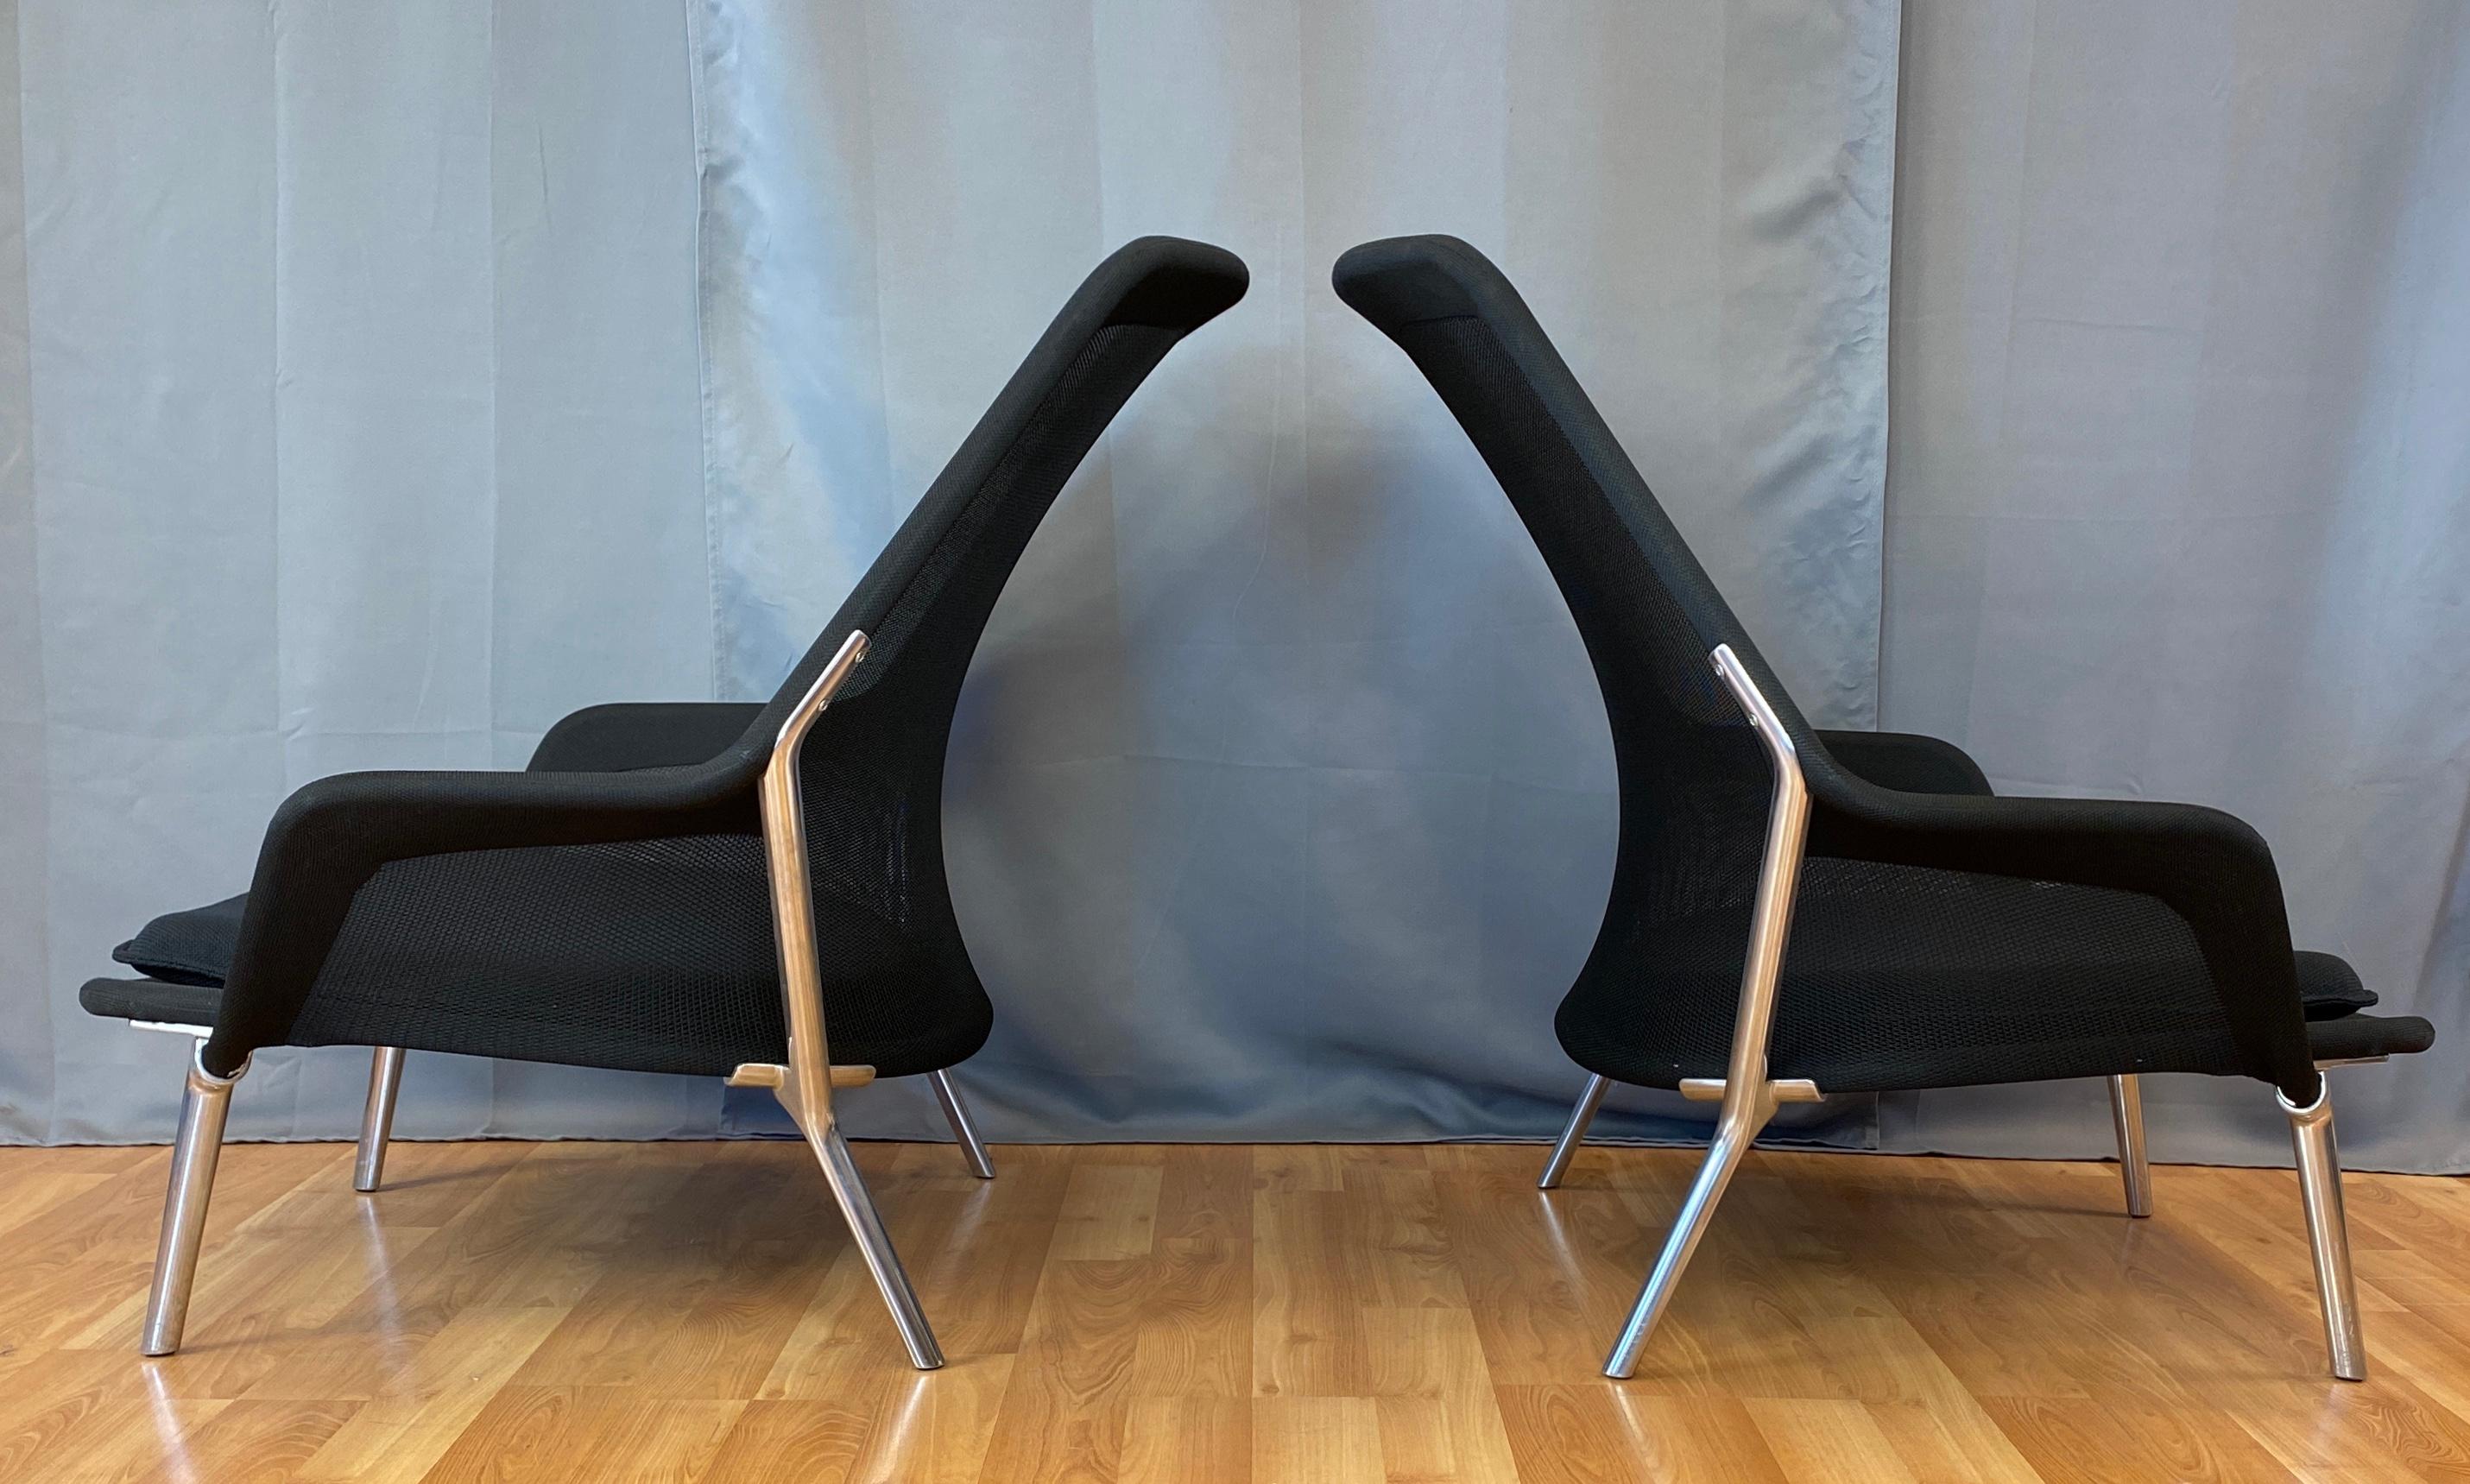 Modern Pair of Black Slow Chairs by Ronan and Erwan Bouroullec for Vitra